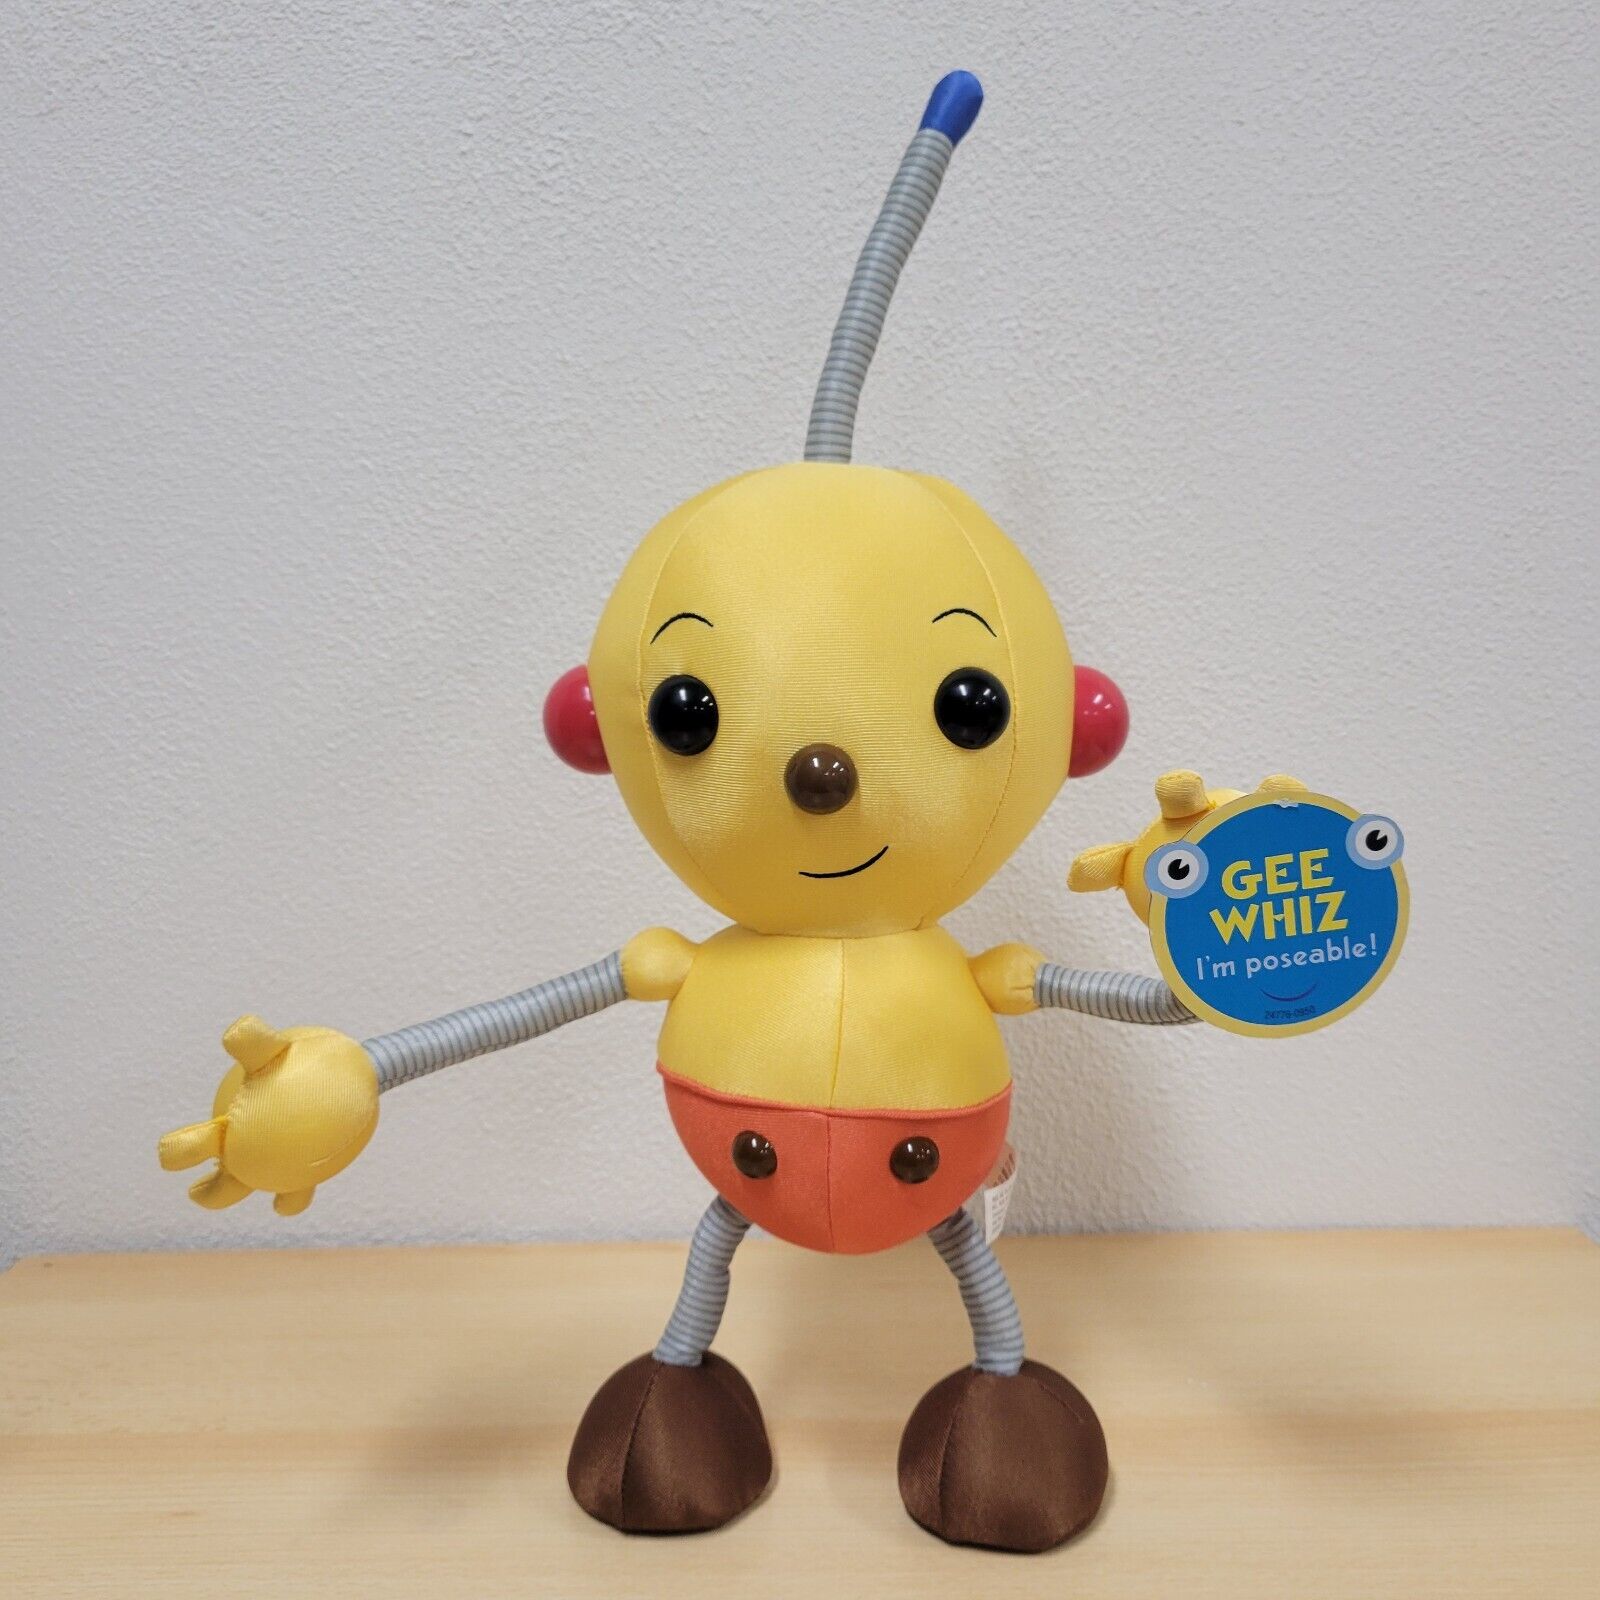 RARE VINTAGE 1999 Rollie Pollie Ollie Mattel Bendable Poseable Plush Doll Toy